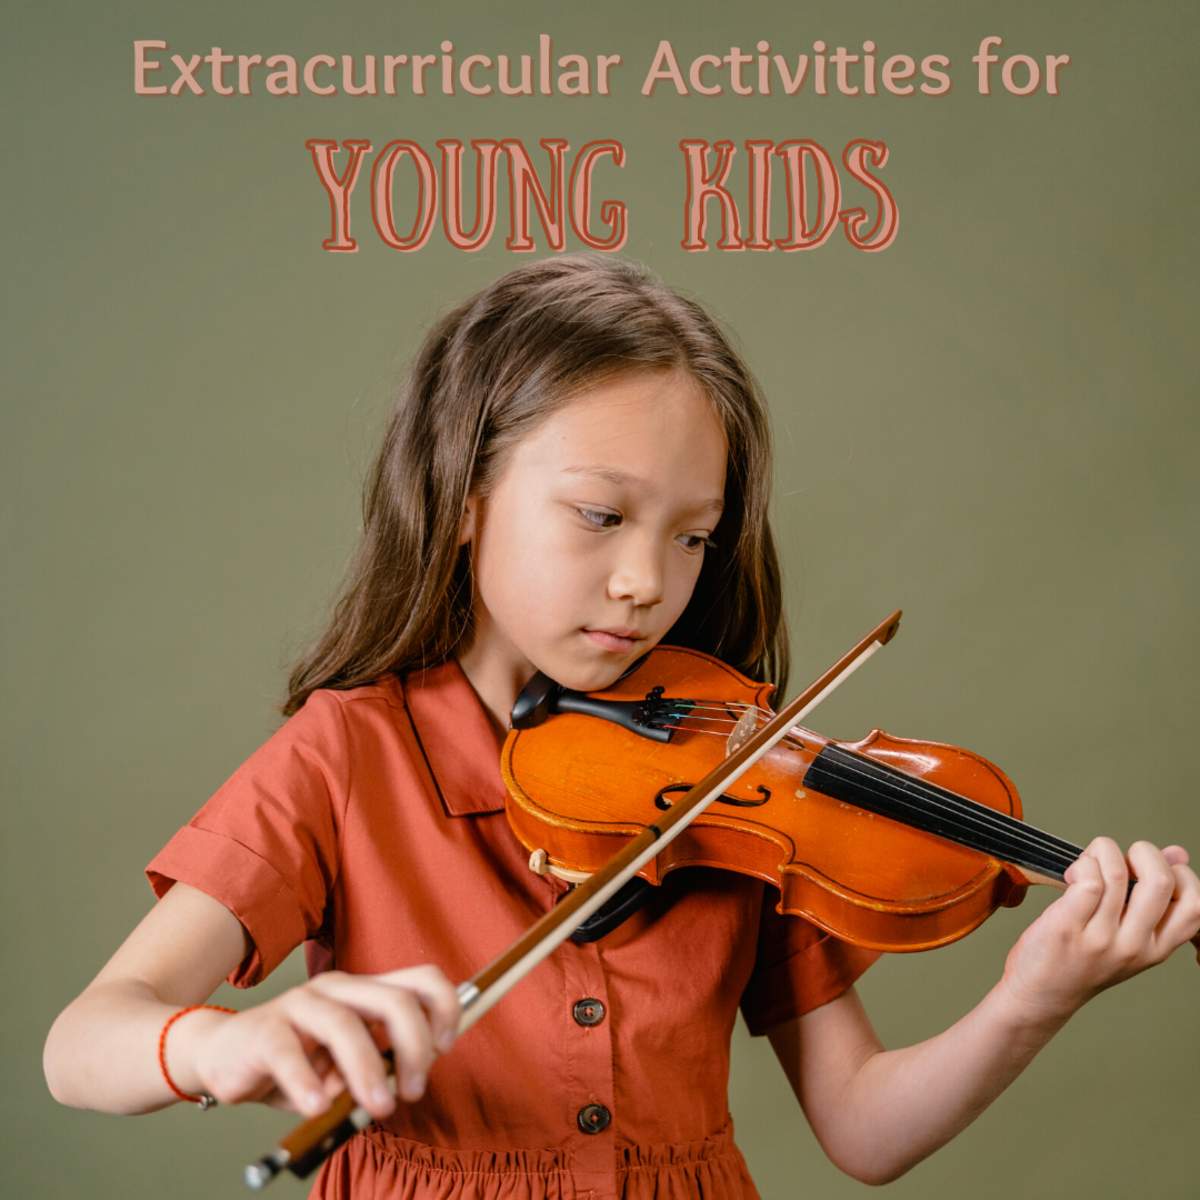 Why You Should Enroll Your Child in Extracurricular Activities Early On